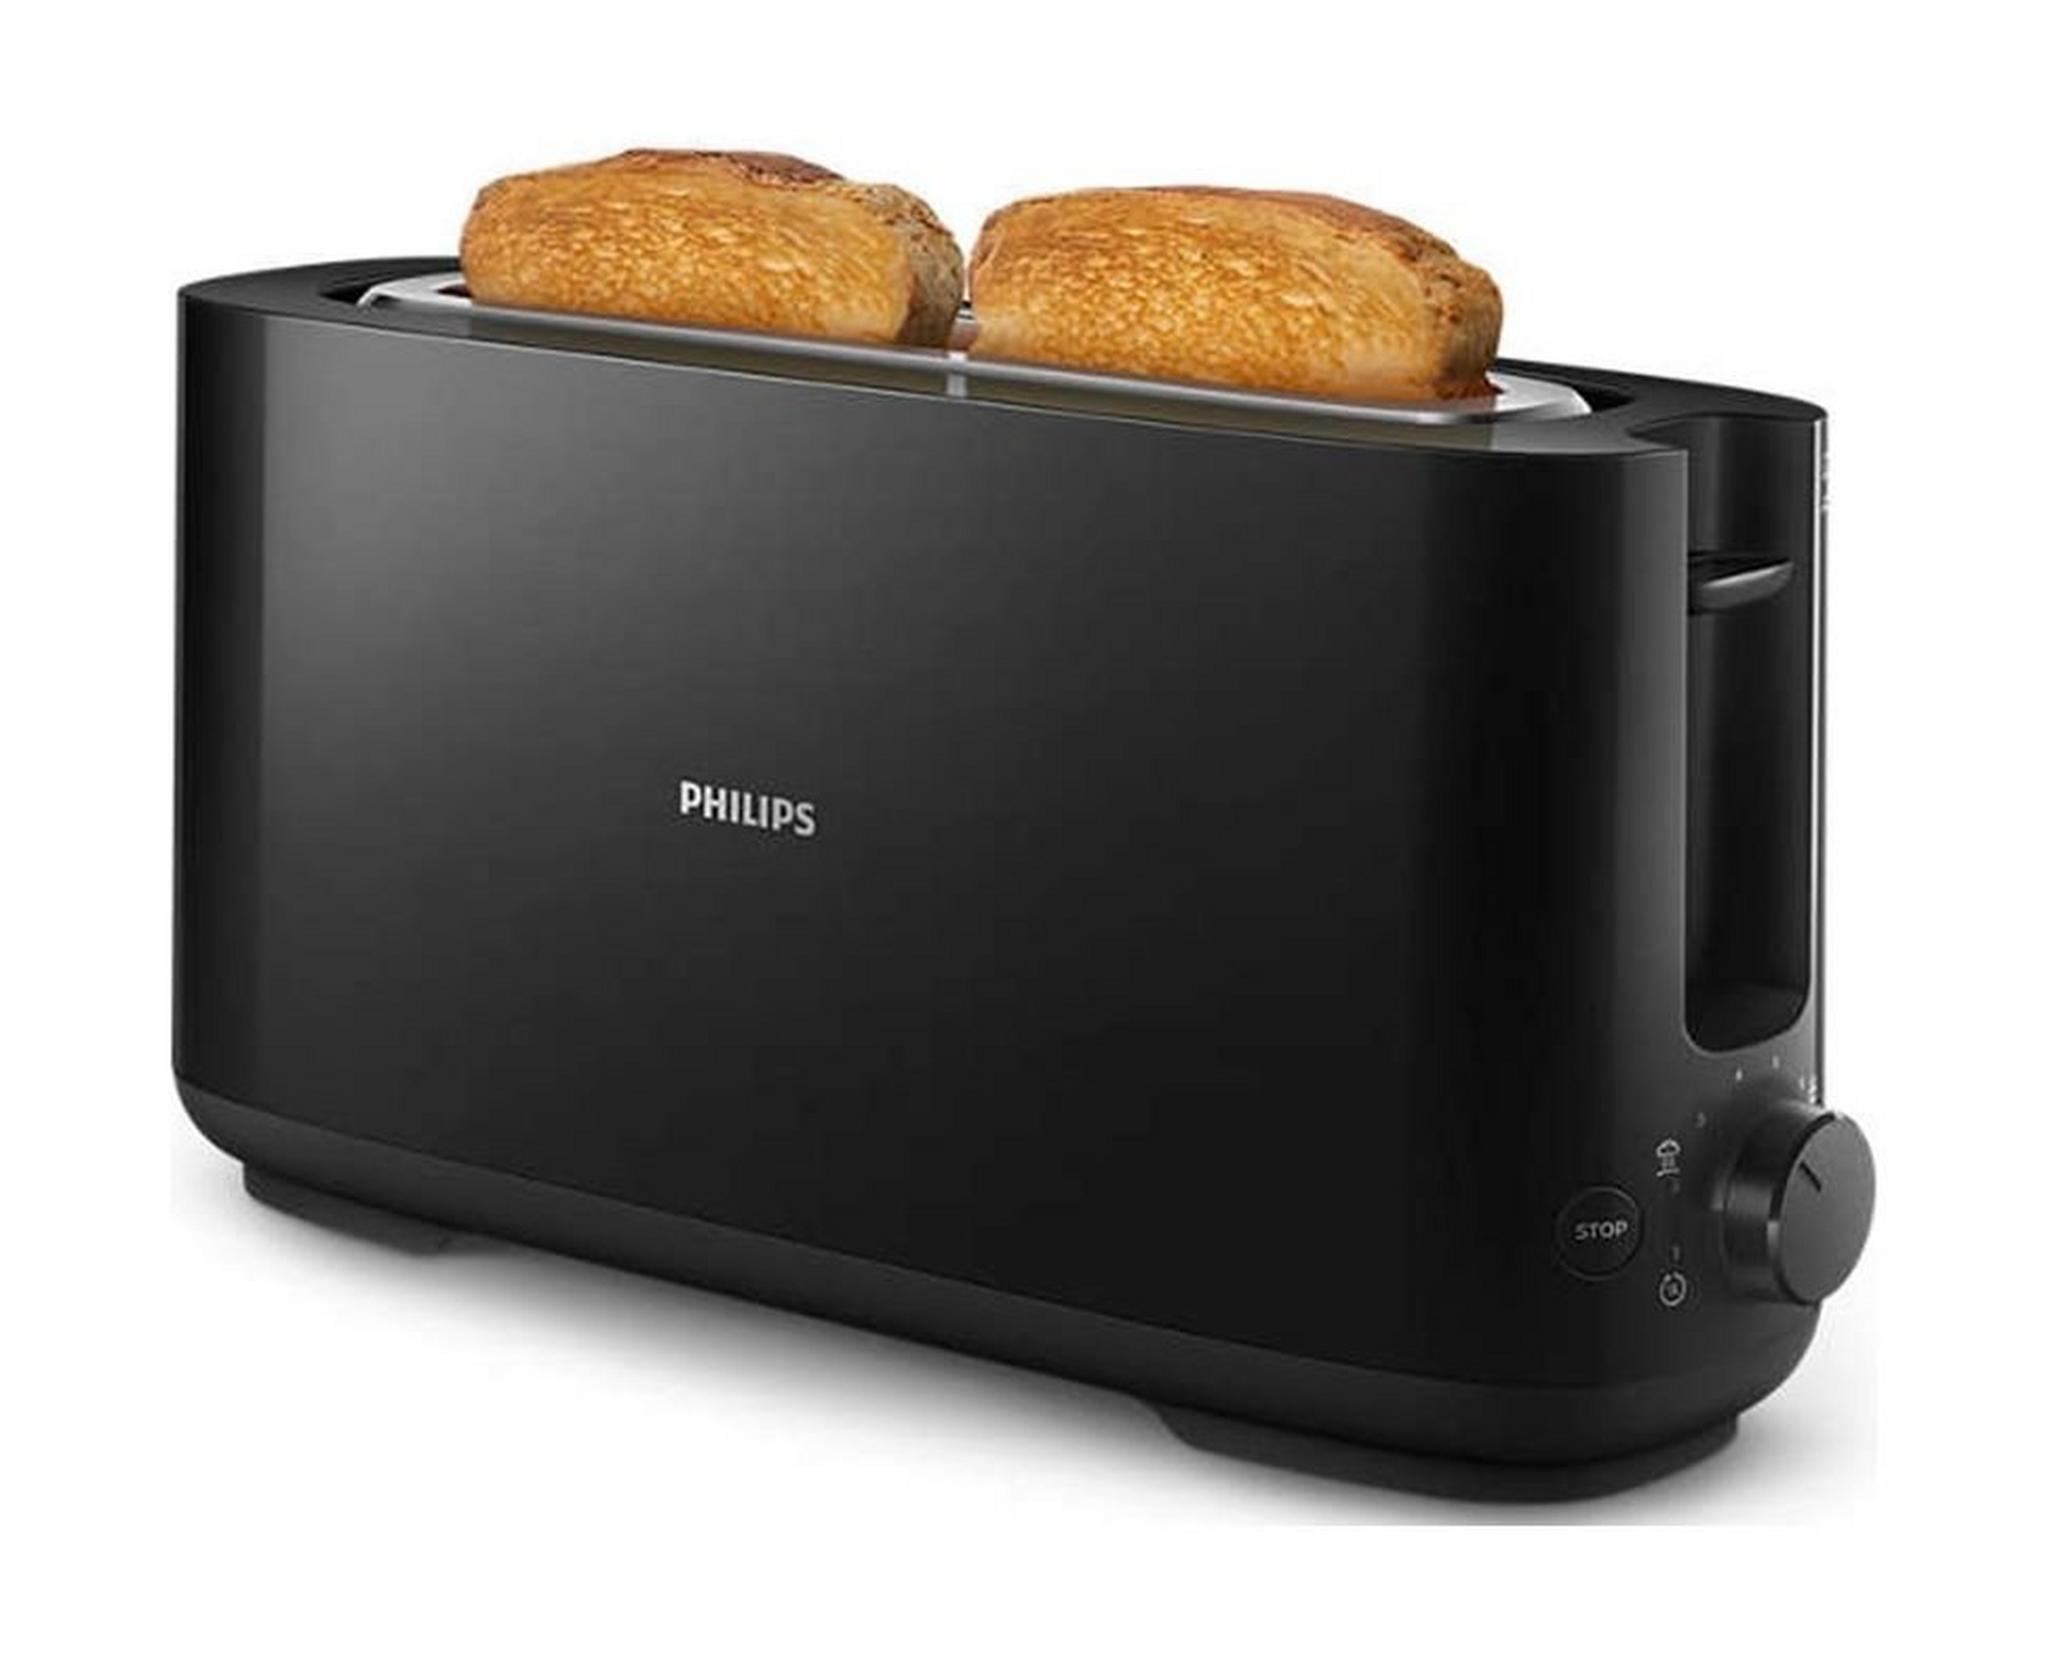 Philips Long Slot Toaster - HD2590/91